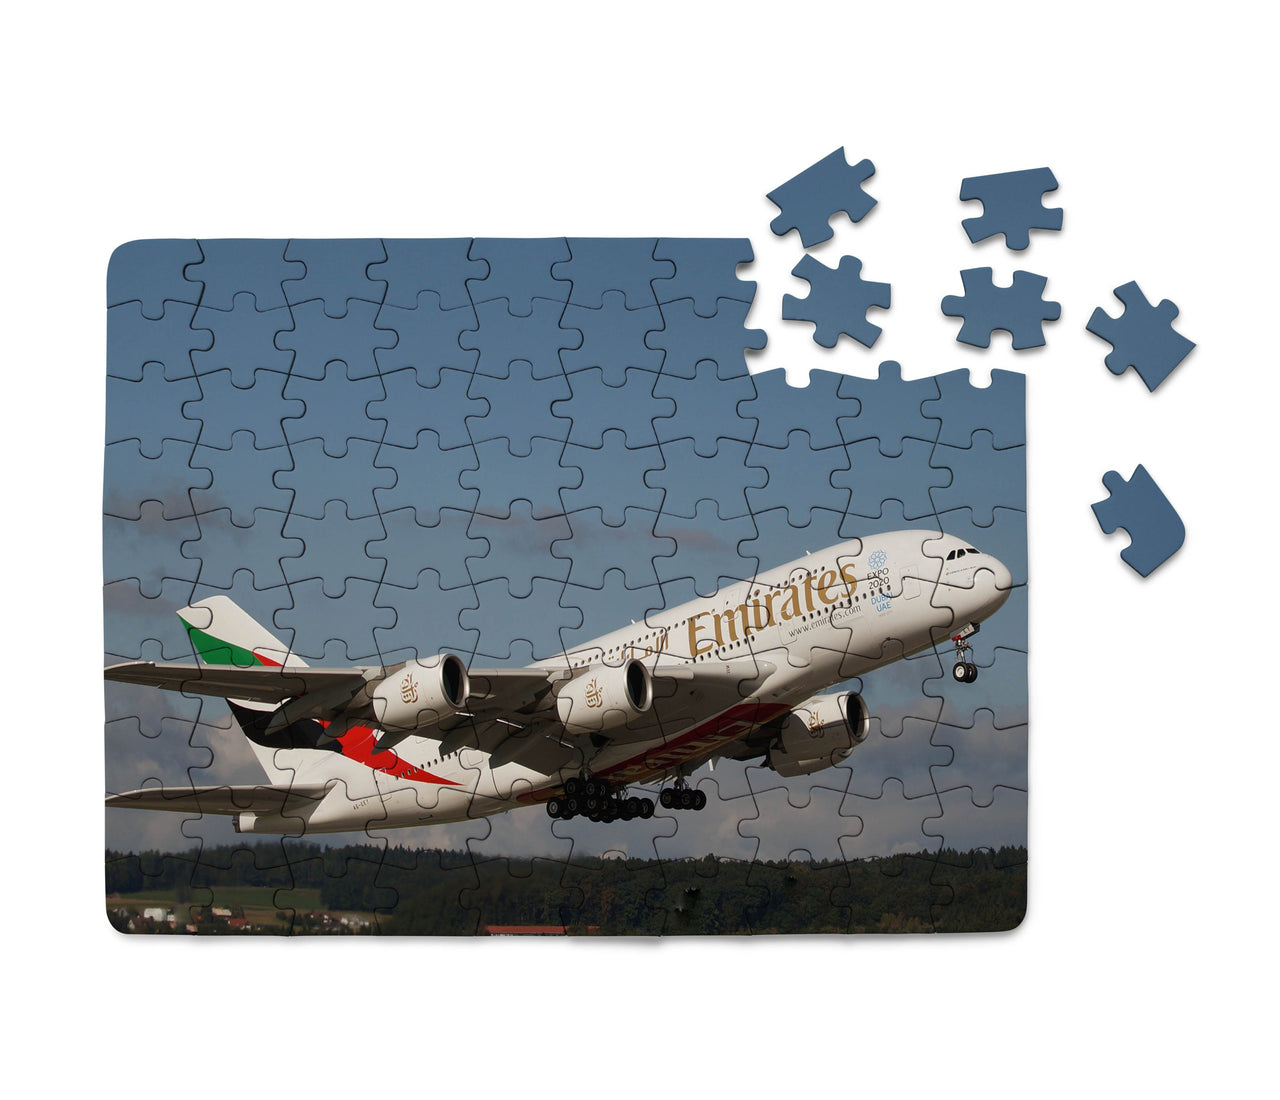 Departing Emirates A380 Printed Puzzles Aviation Shop 